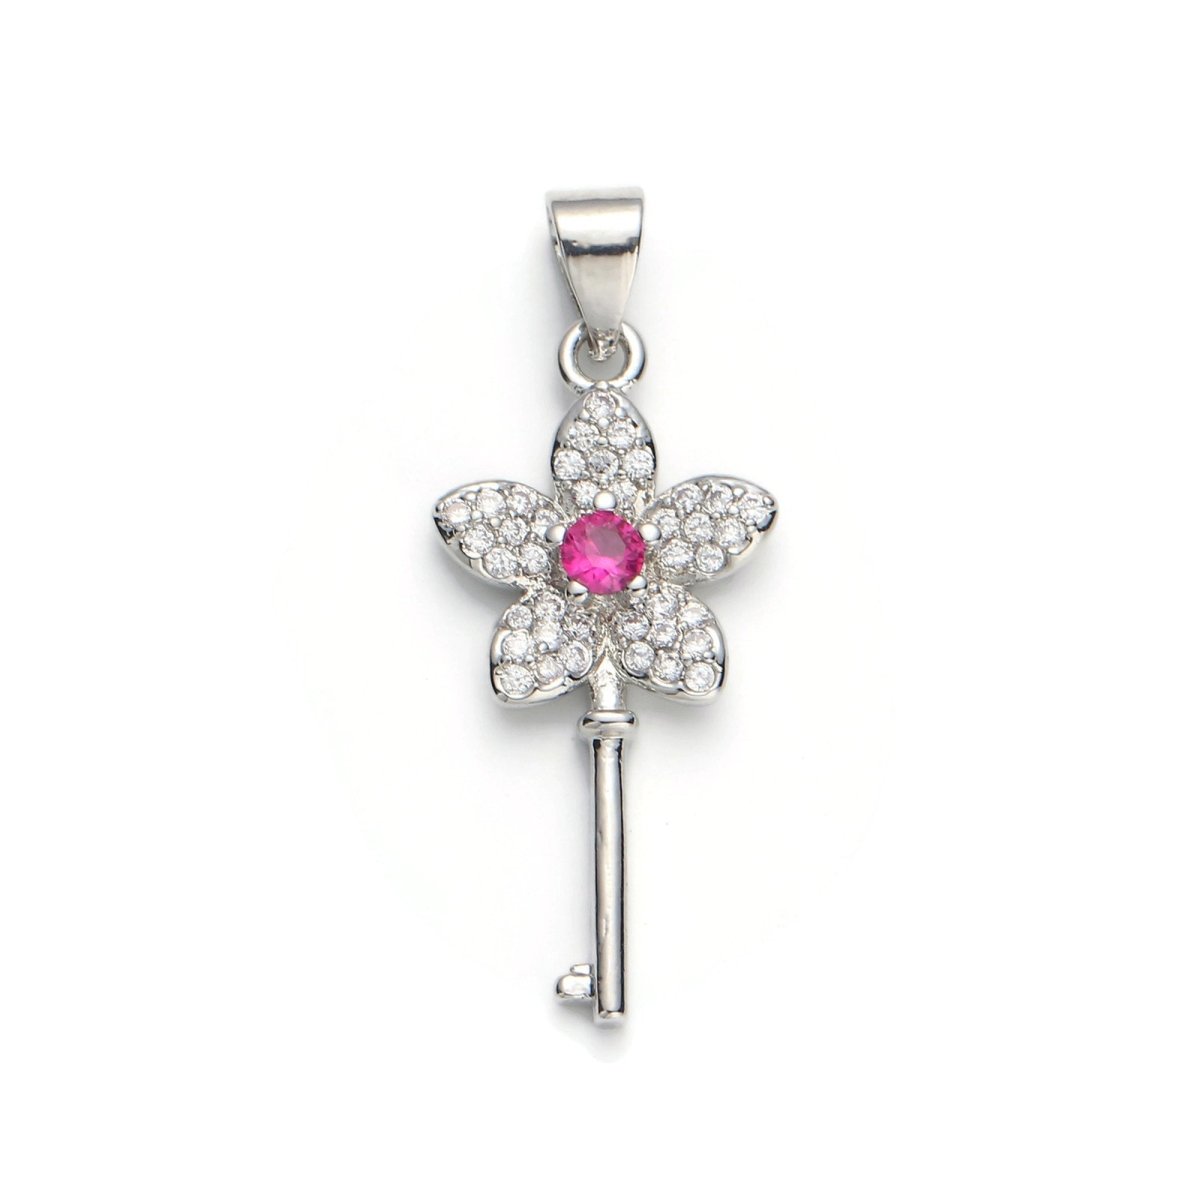 White Gold Filled Micro Pave CZ Flower Key Pendant Charm, Micro Pave CZ Key Pendant Charm, White Gold Key Pendant, For DIY Jewelry I-607 - DLUXCA